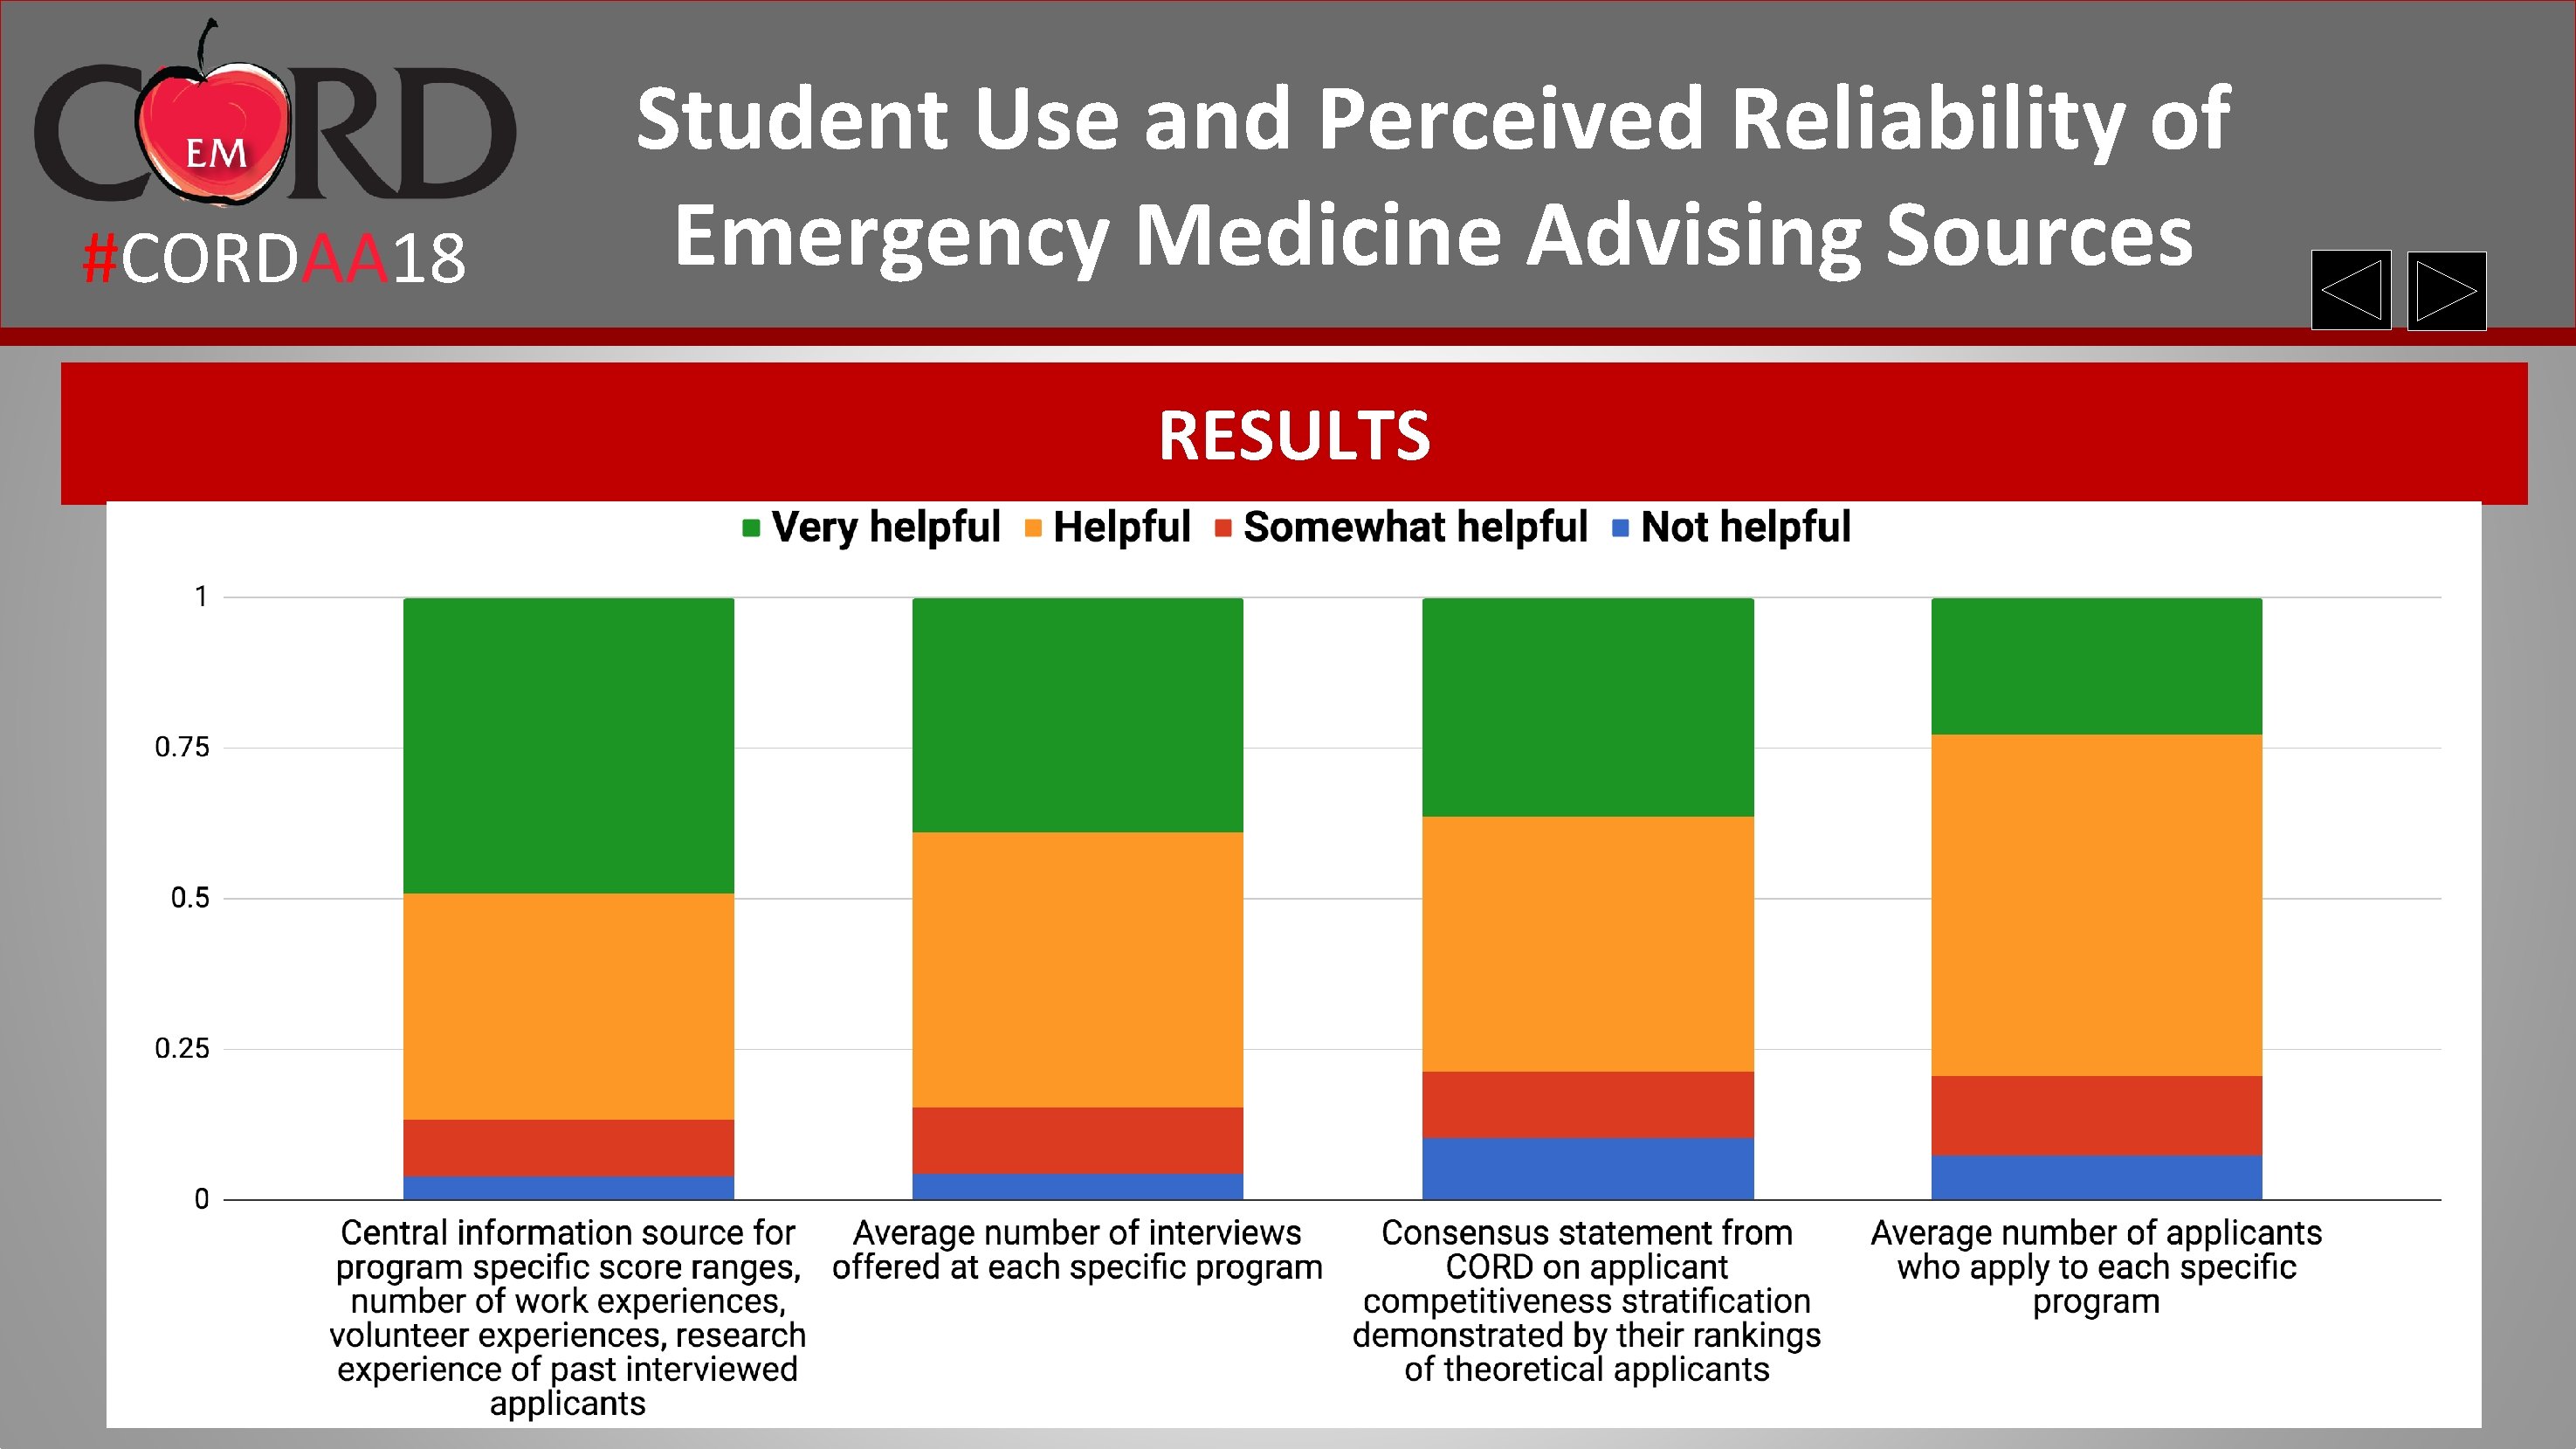 #CORDAA 18 Student Use and Perceived Reliability of Emergency Medicine Advising Sources RESULTS 